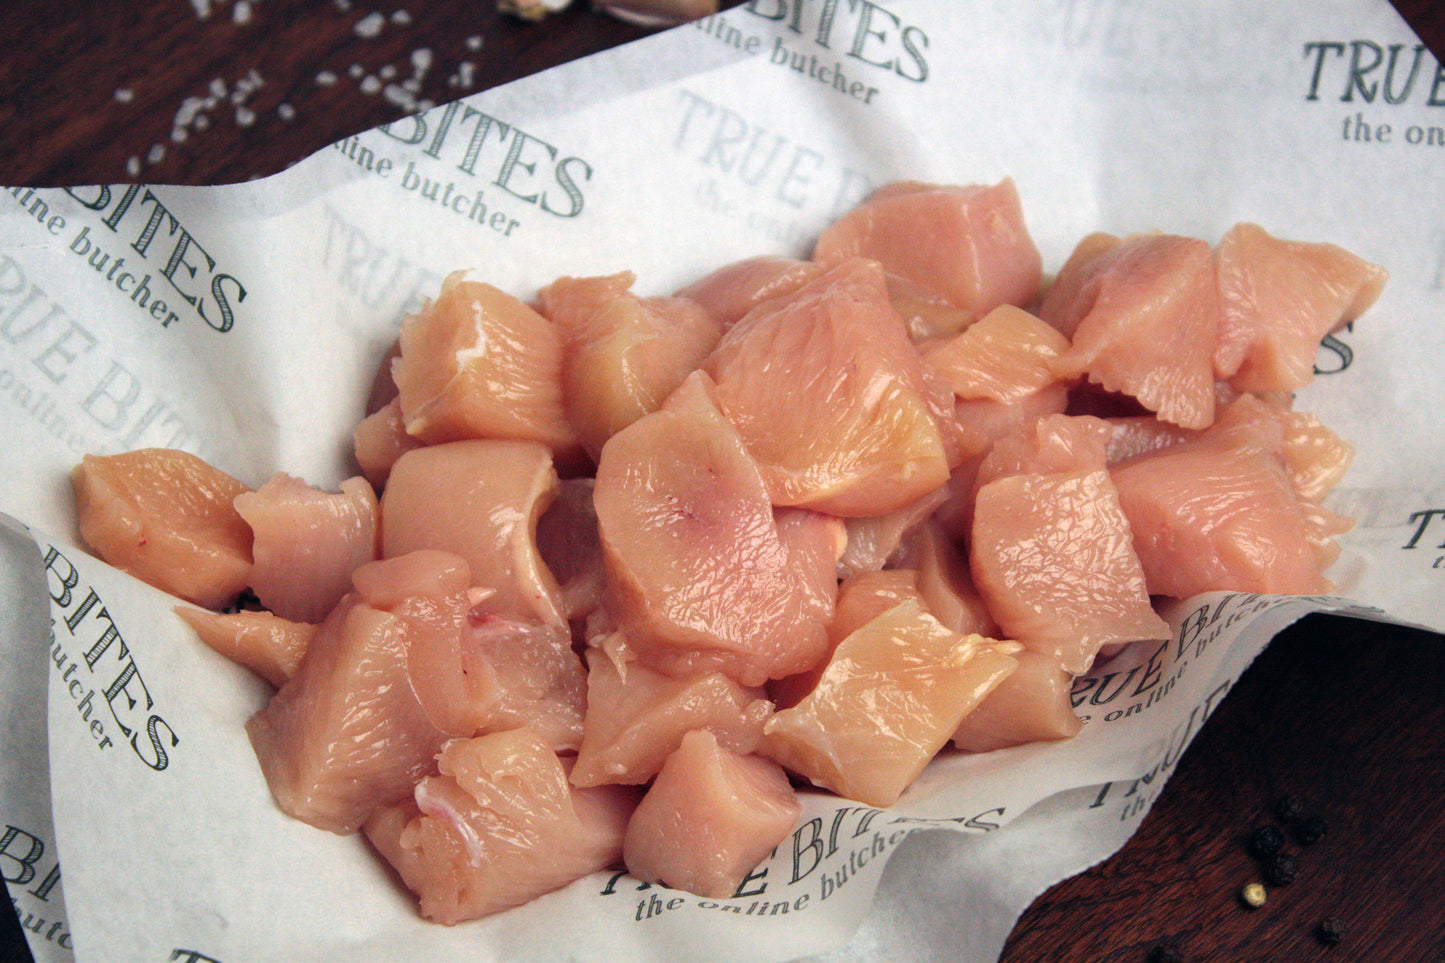 diced chicken breast on true bites greaseproof paper